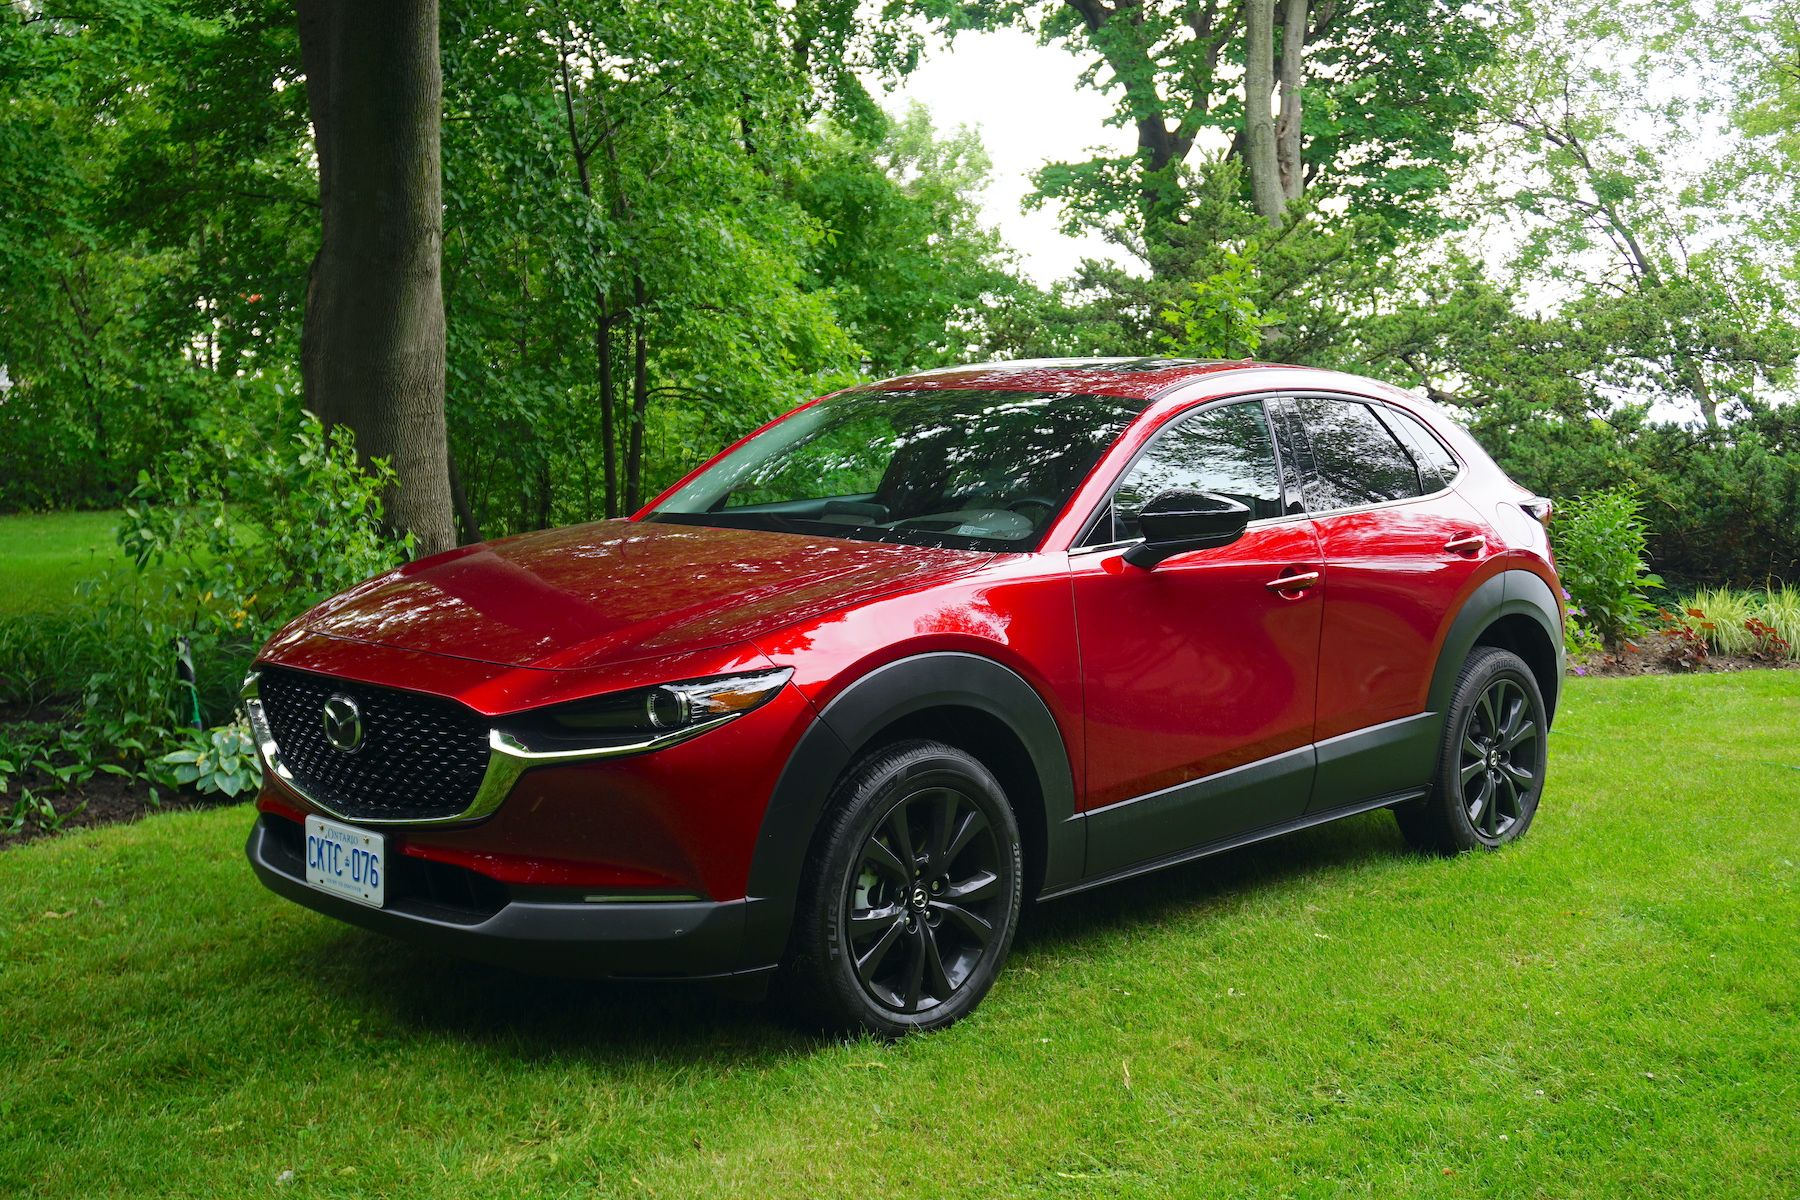 2022 Mazda CX-30 Turbo Review - The Crossover for Drivers